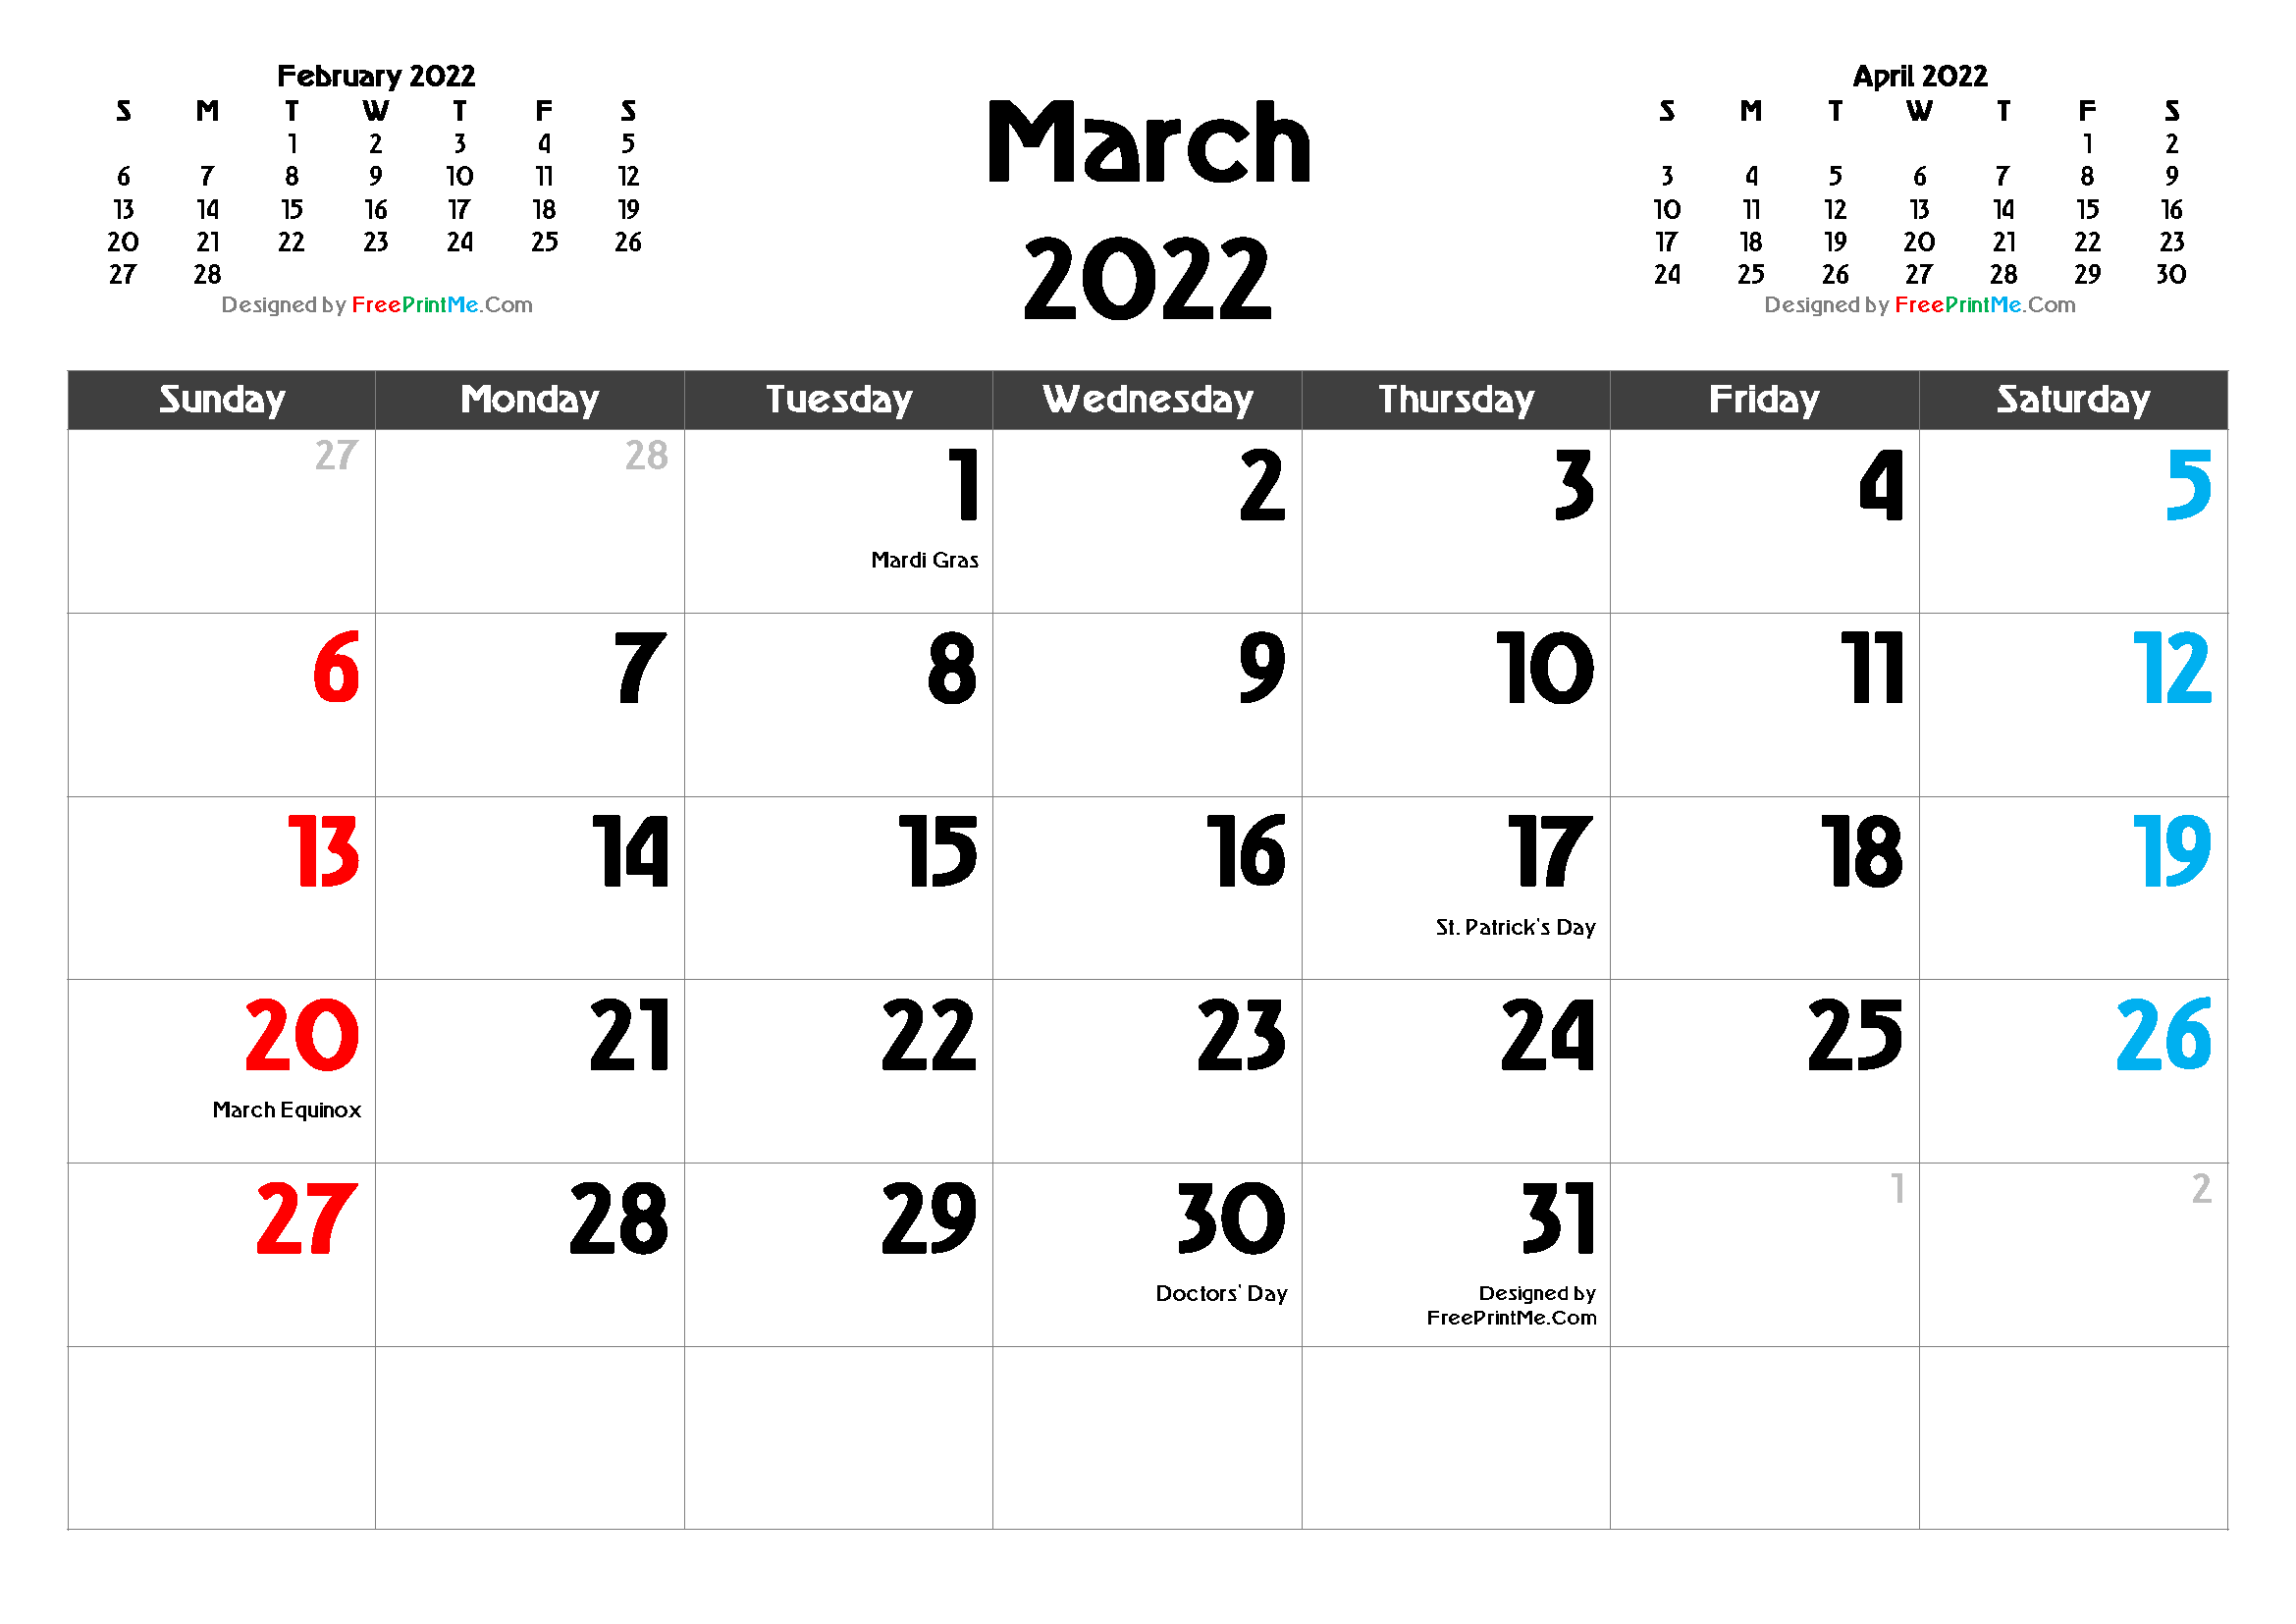 Free Printable 2022 Monthly Calendar With Holidays Free Printable March 2022 Calendar Pdf And Image